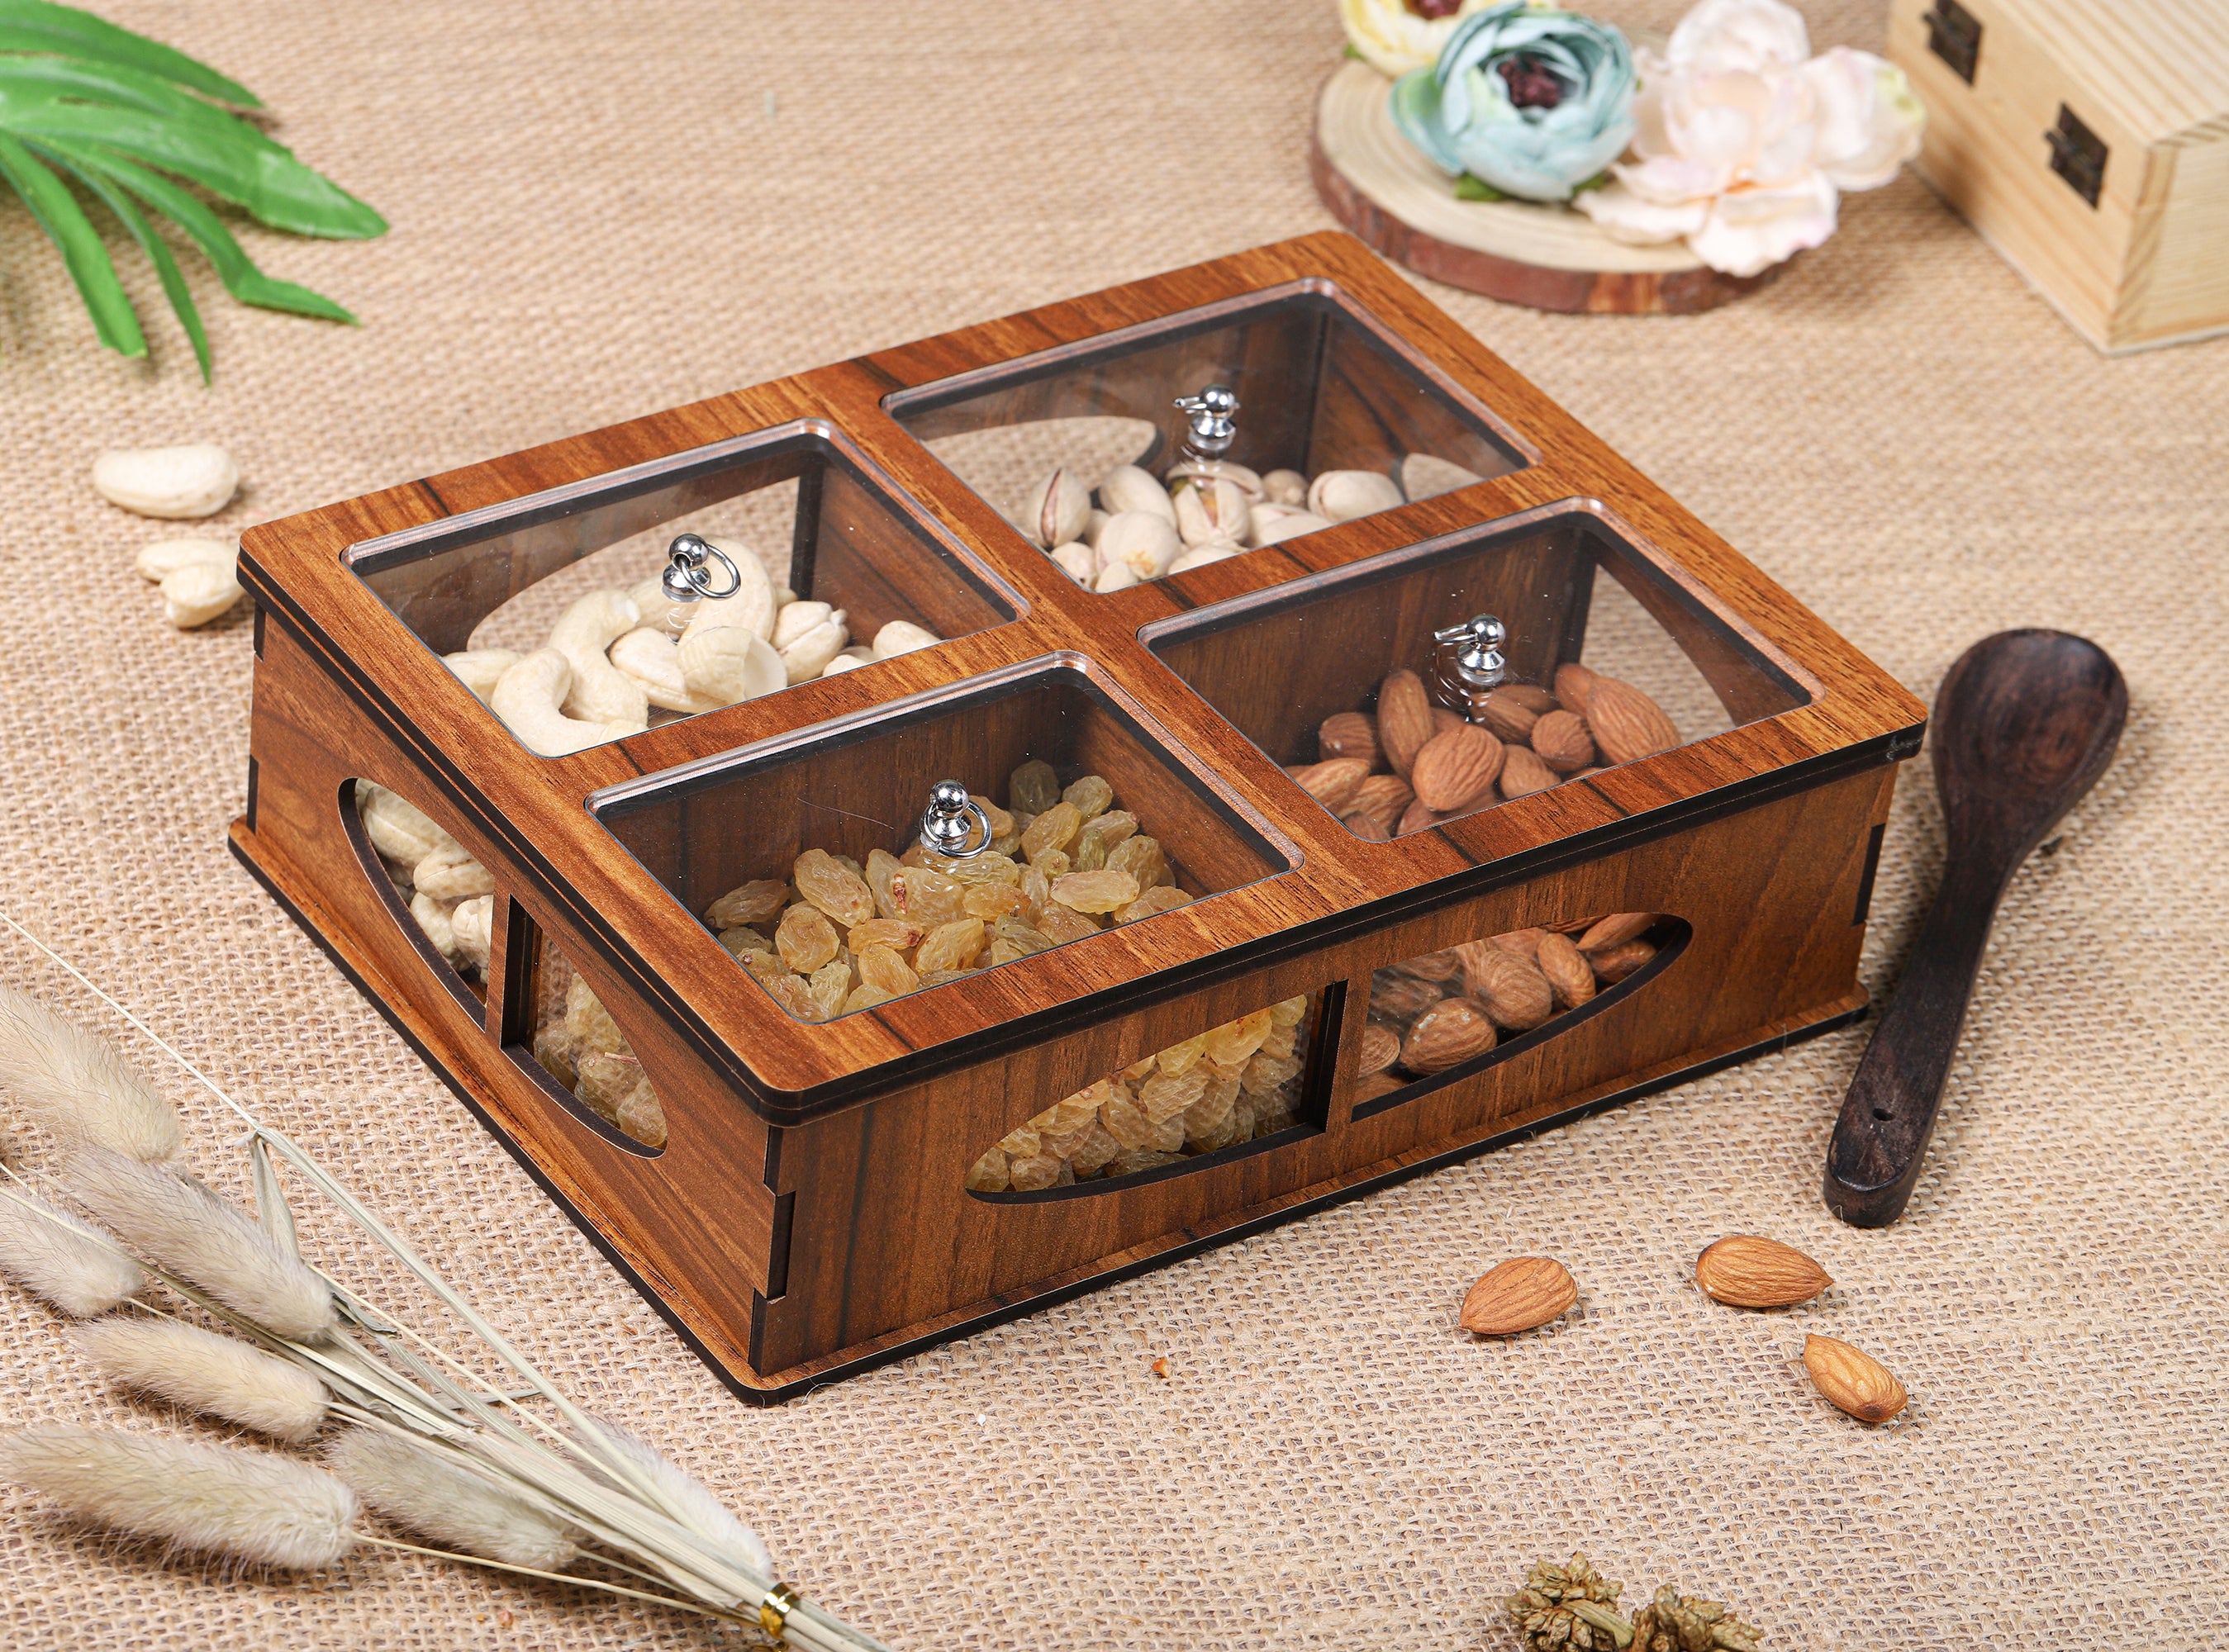 Dryfruit and Mukhwas Box Container for Festival Gifting, Home & Kitchen Gifting (4 Compartment)